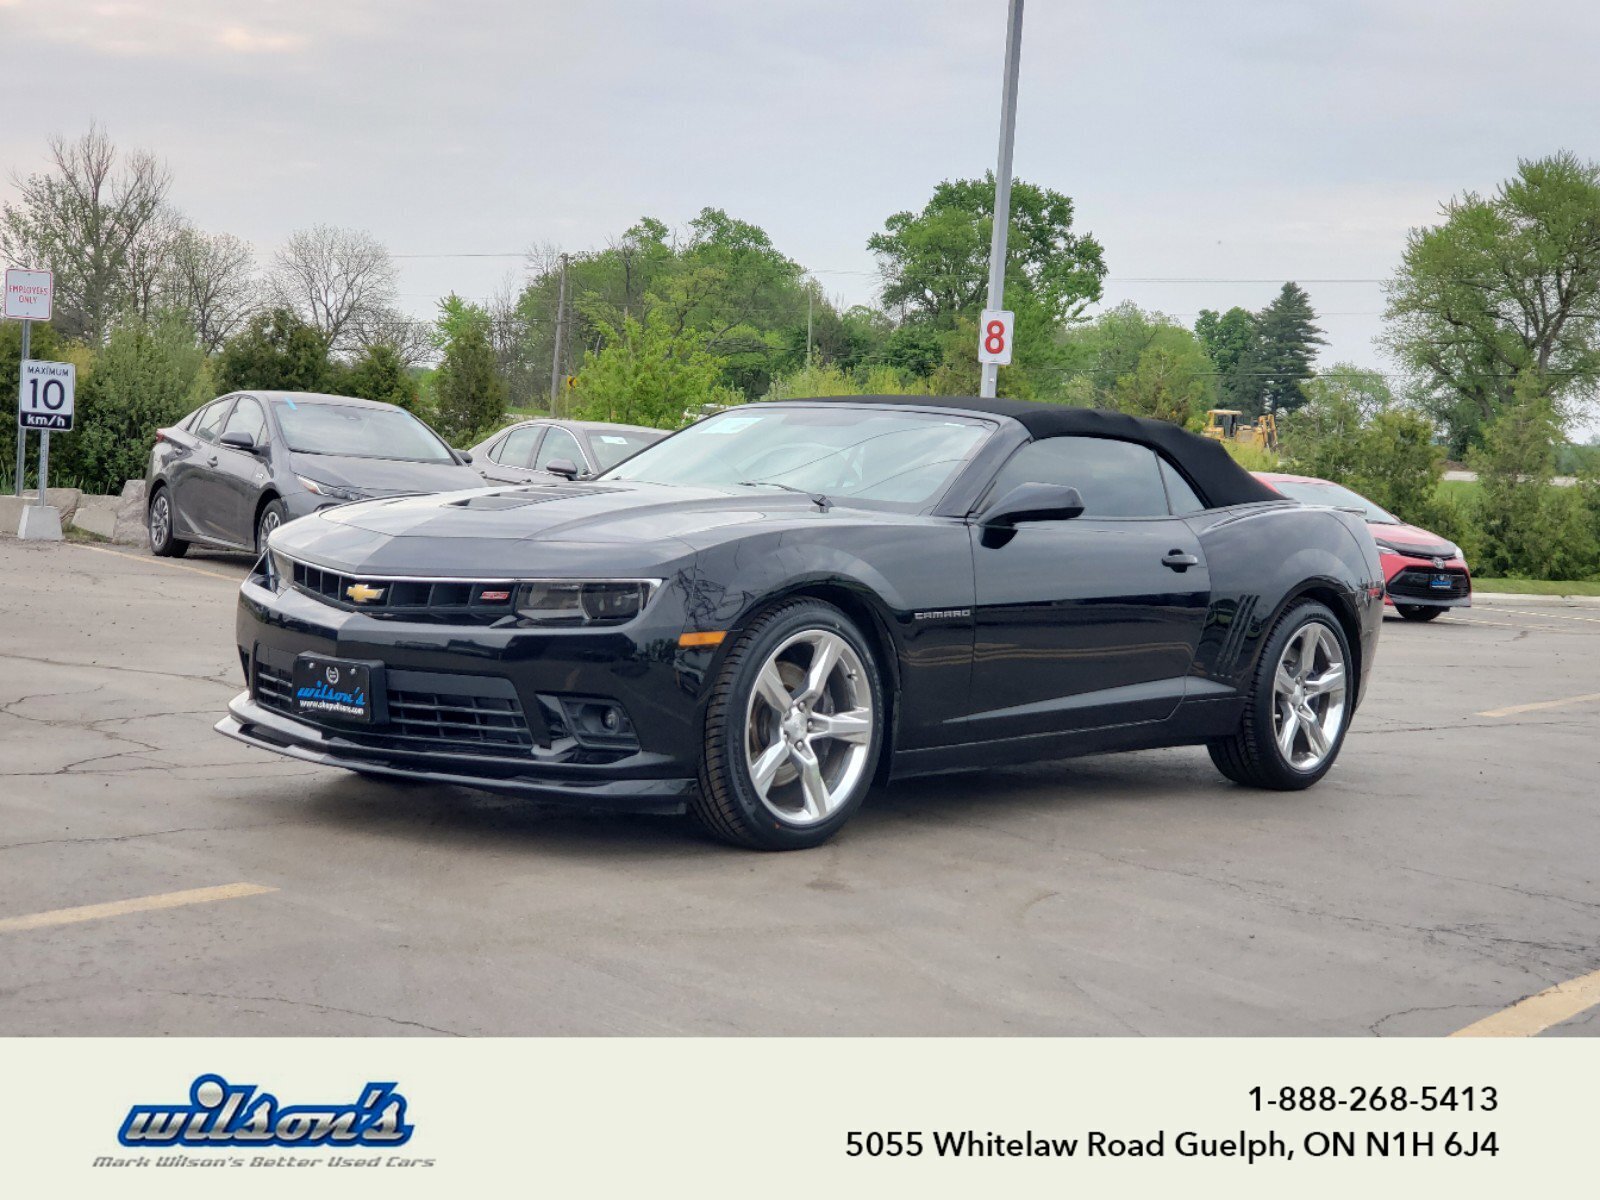 2015 Chevrolet Camaro SS Convertible, V8, RS, Leather, Nav, Head-Up Disp